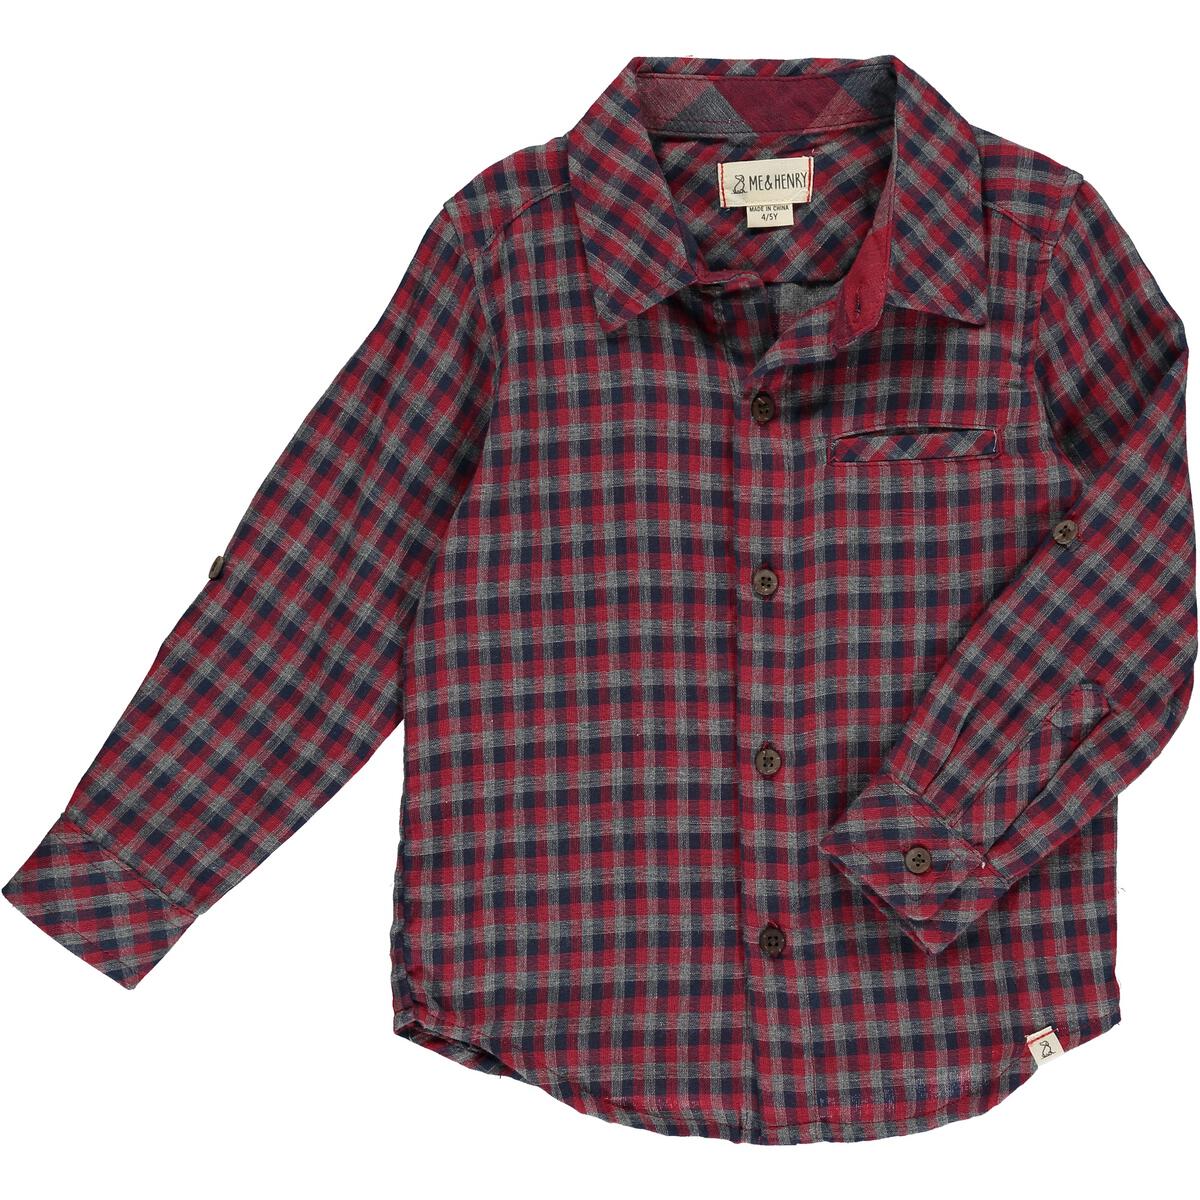 Atwood Woven Shirt | Red Multi Plaid